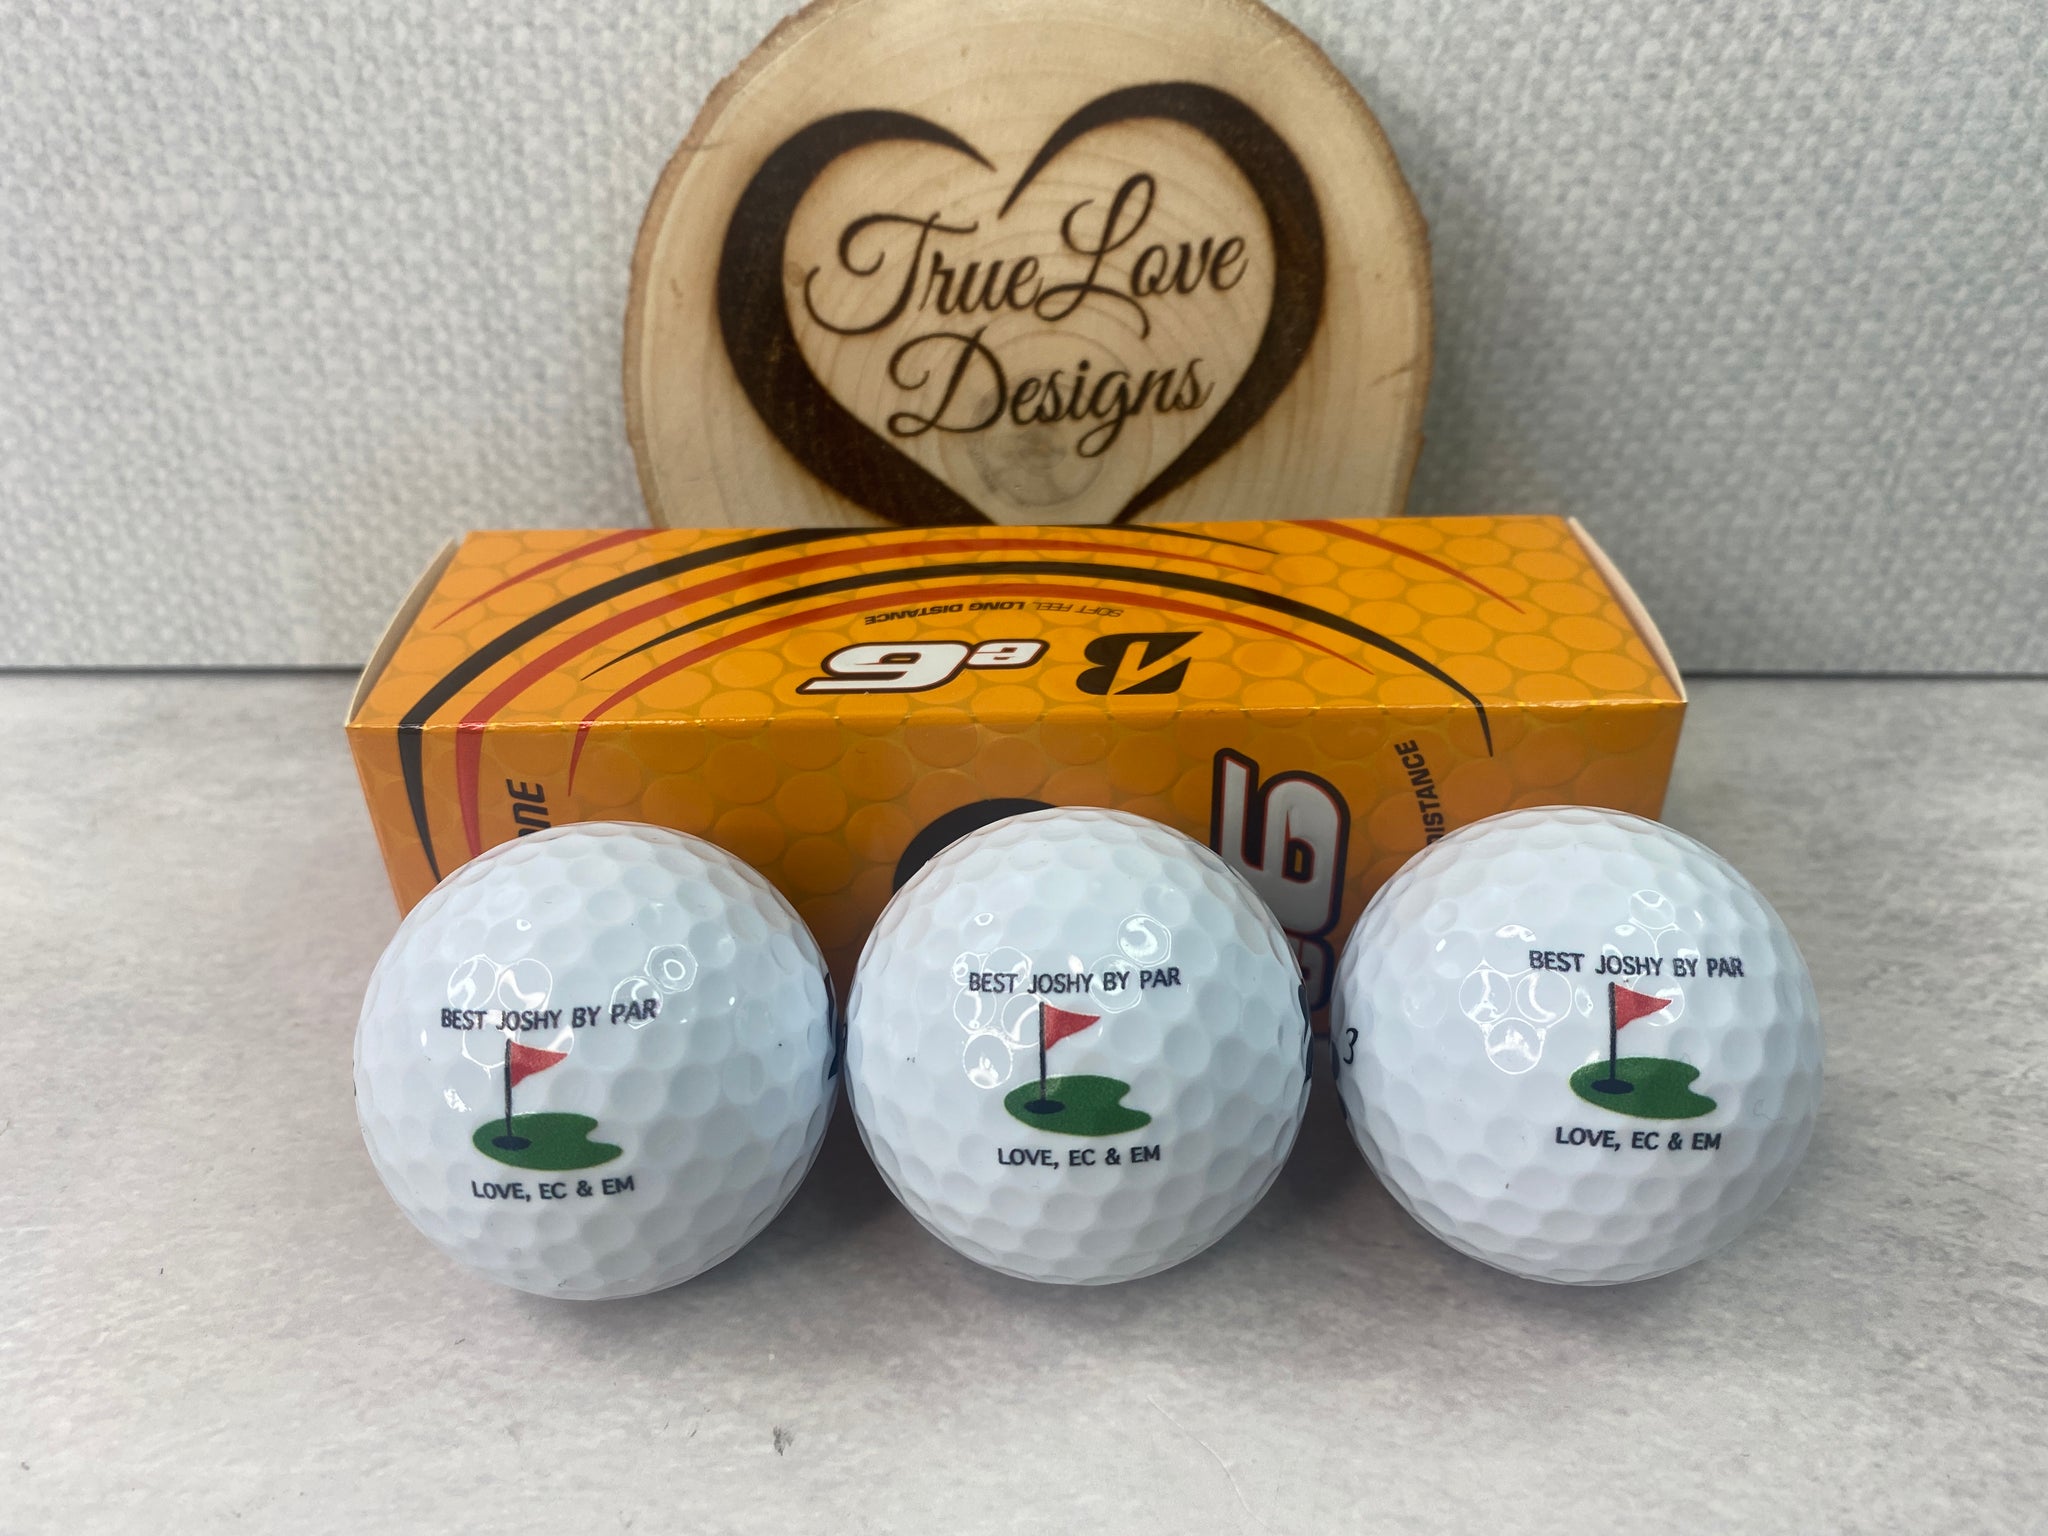 The Best Personalized Golf Gifts